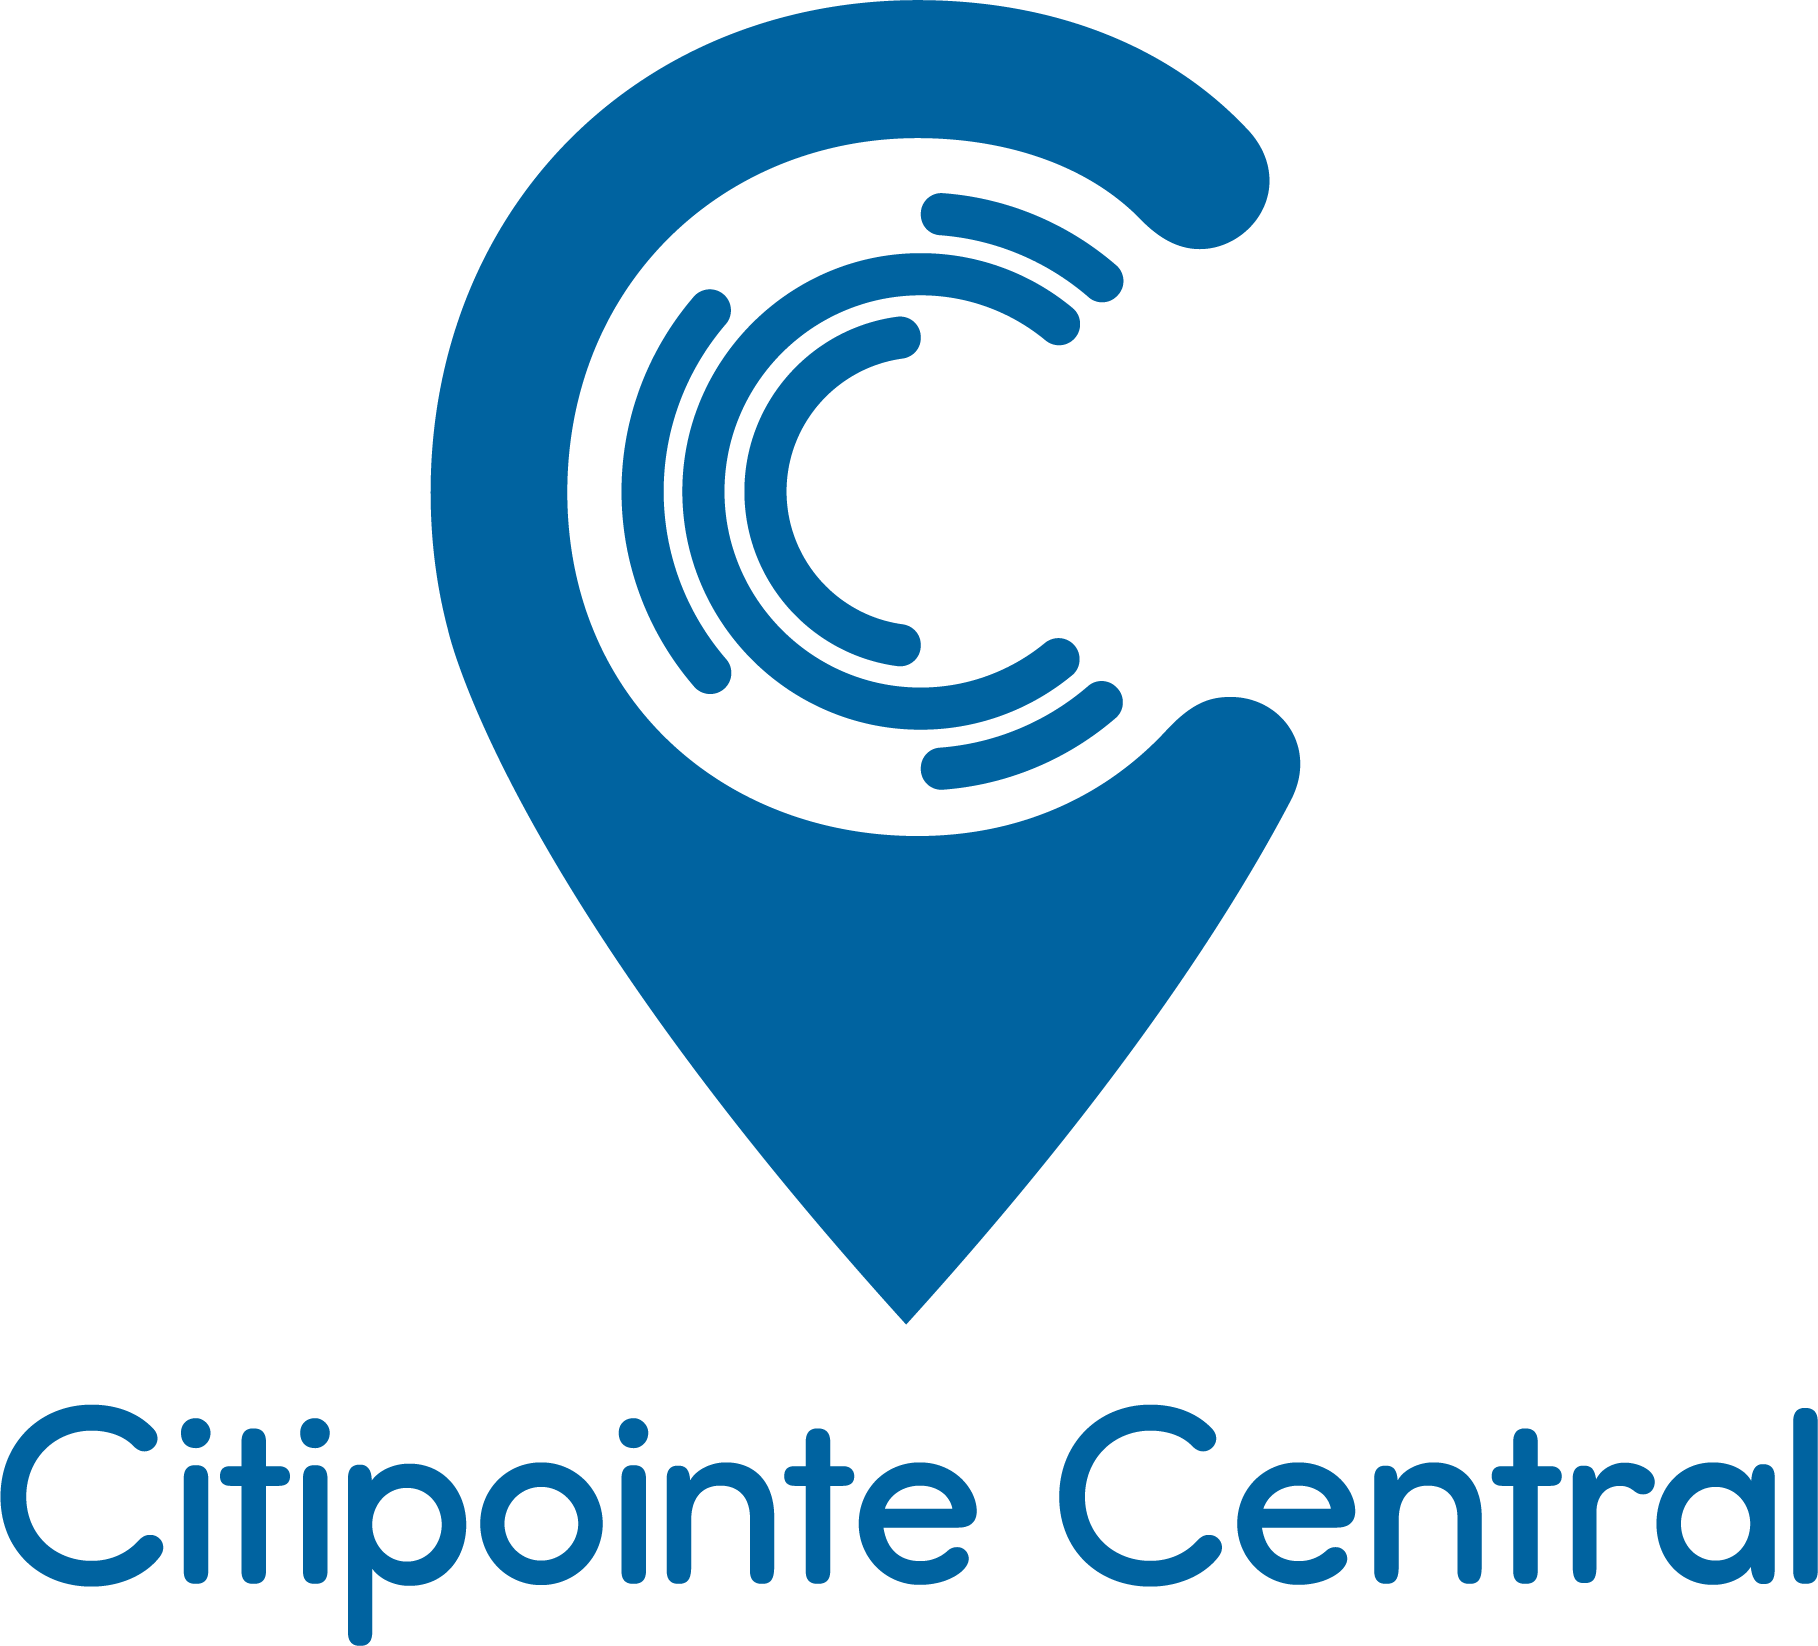 Central Logo - Citipointe Central - Citipointe Christian College